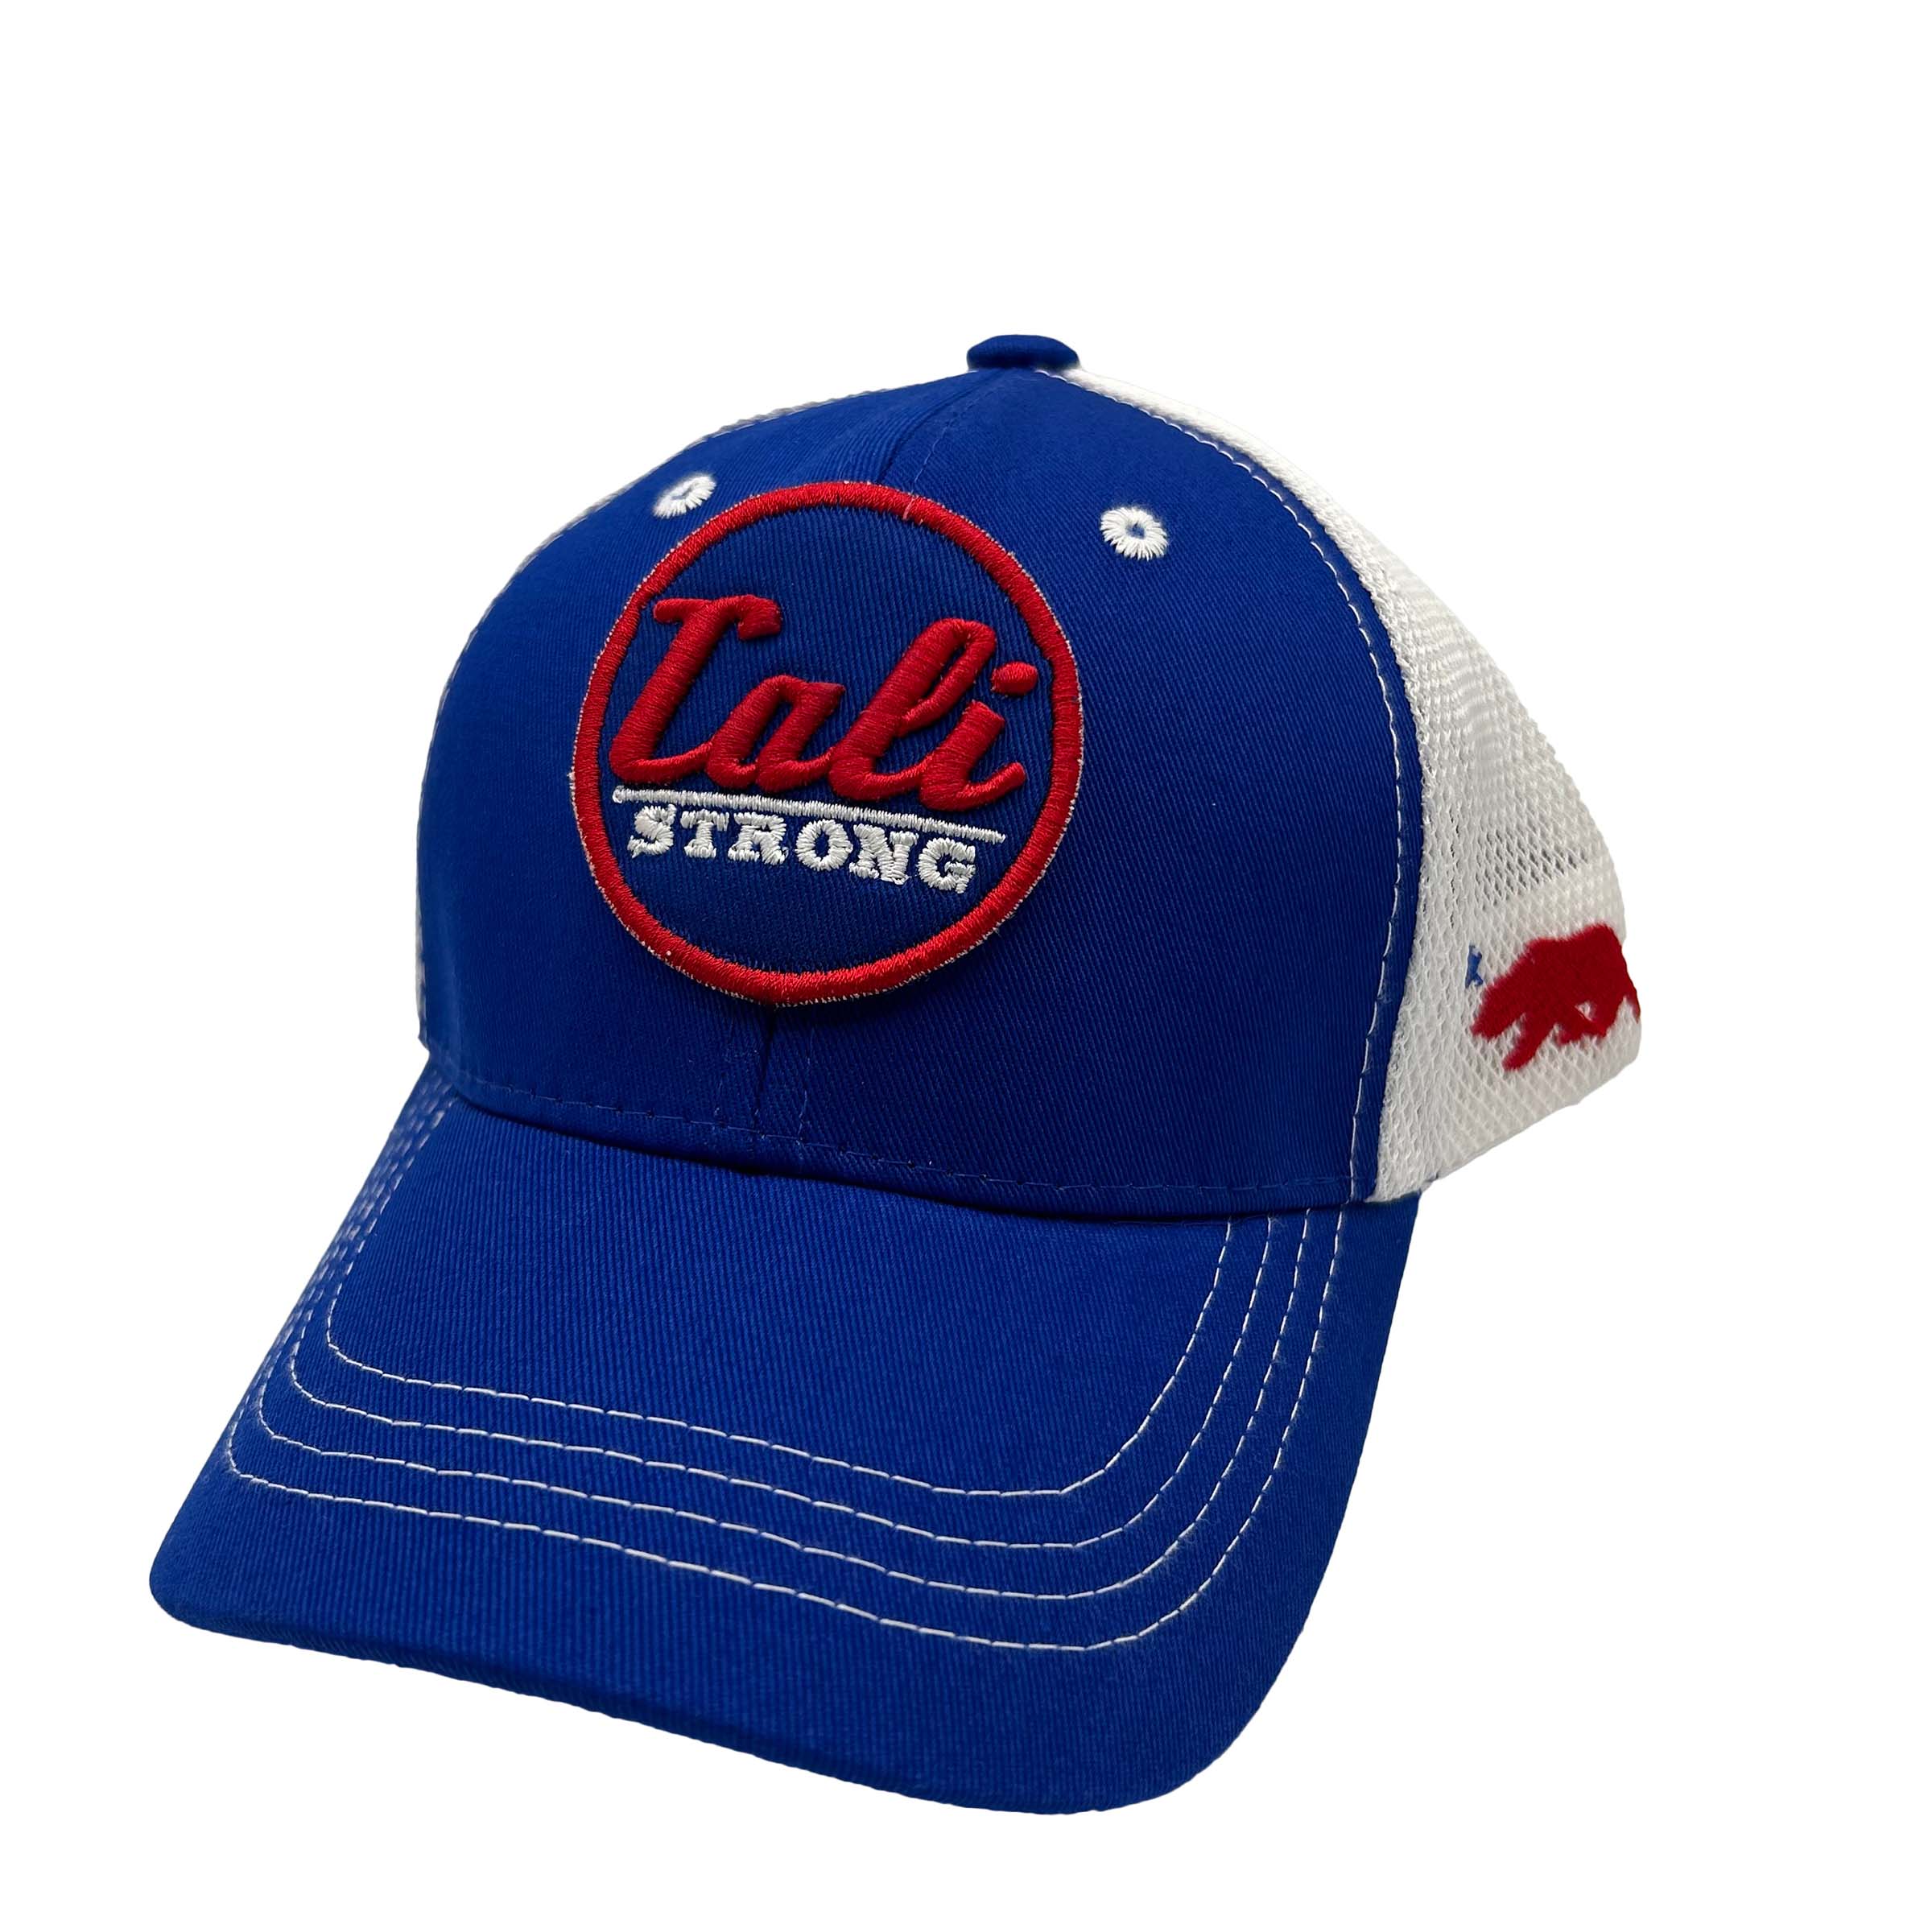 CALI Strong Classic Tactical Trucker Hat Morale Patch Blue Red Kids - Headwear - Image 1 - CALI Strong